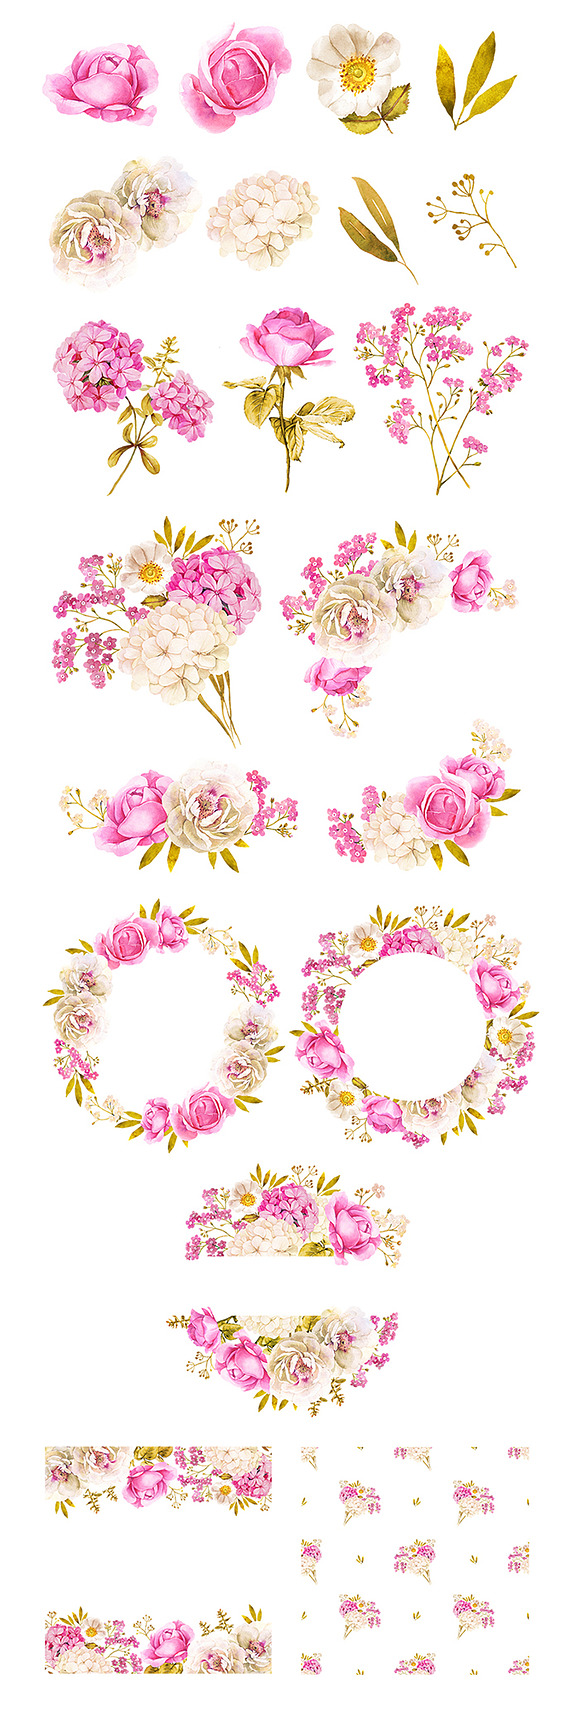 Wedding flowers in pink and gold in Illustrations - product preview 1